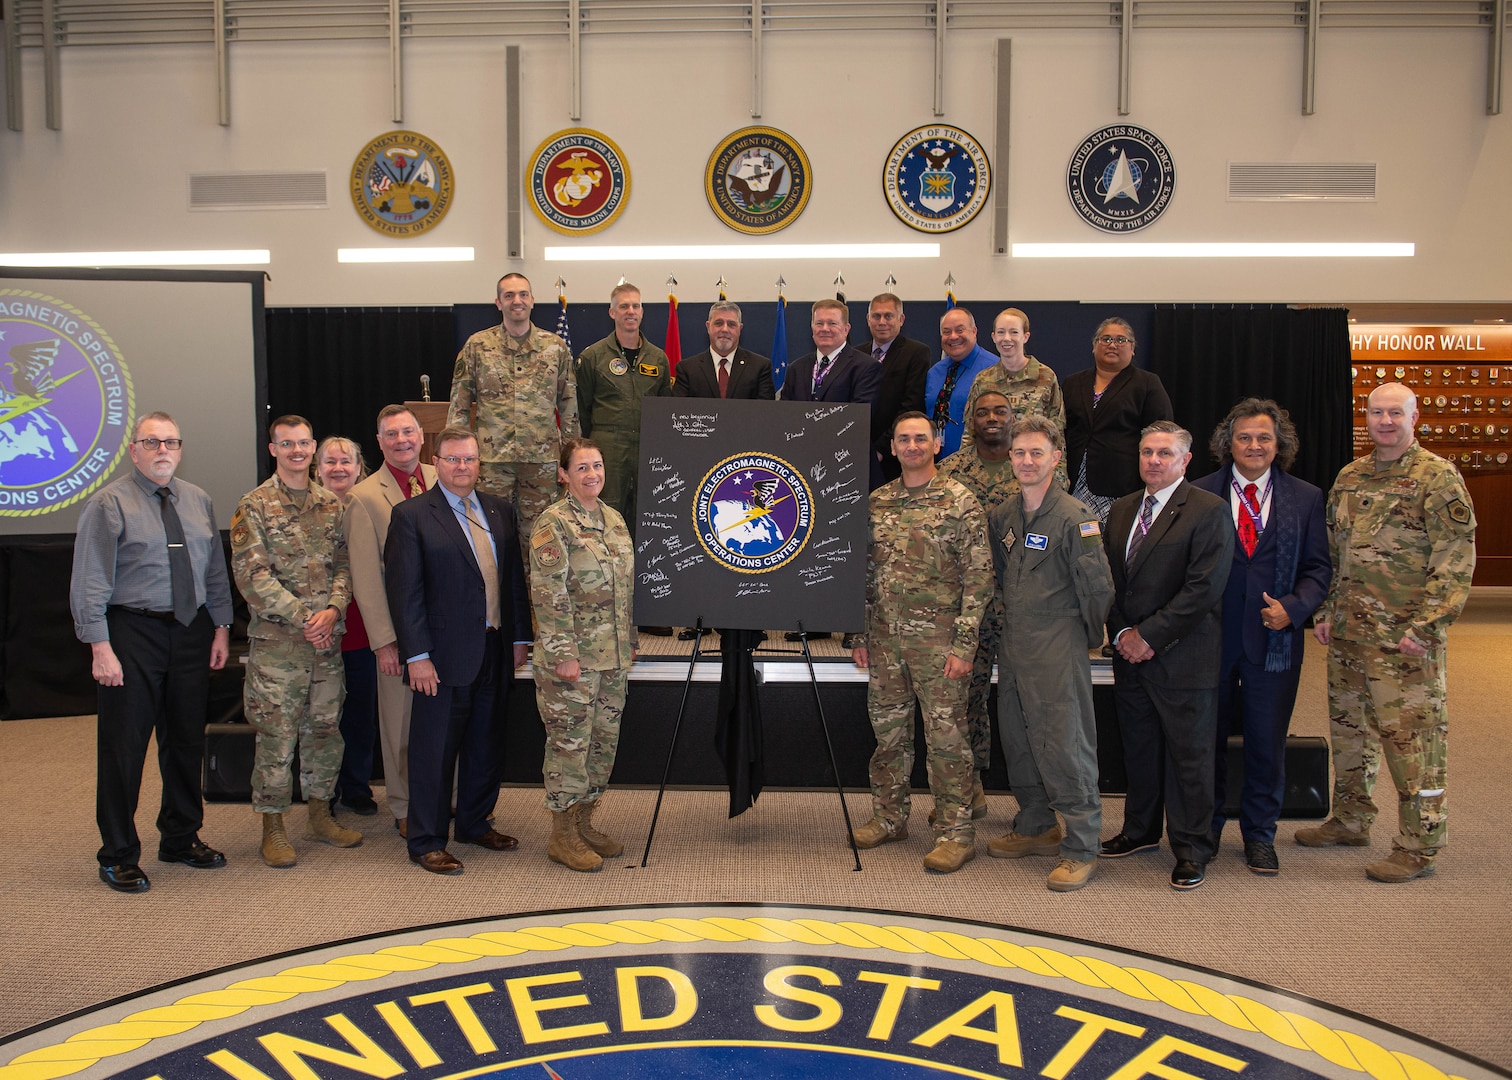 U.S. Strategic Command (USSTRATCOM) officially stood up the Joint Electromagnetic Spectrum (EMS) Operations Center (JEC) during a ceremony at USSTRATCOM today. The JEC will serve as the heart of the Department of Defense's Electromagnetic Spectrum Operations with the primary goal of restructuring accounts for force management, planning, situation monitoring, decision-making, and force direction.